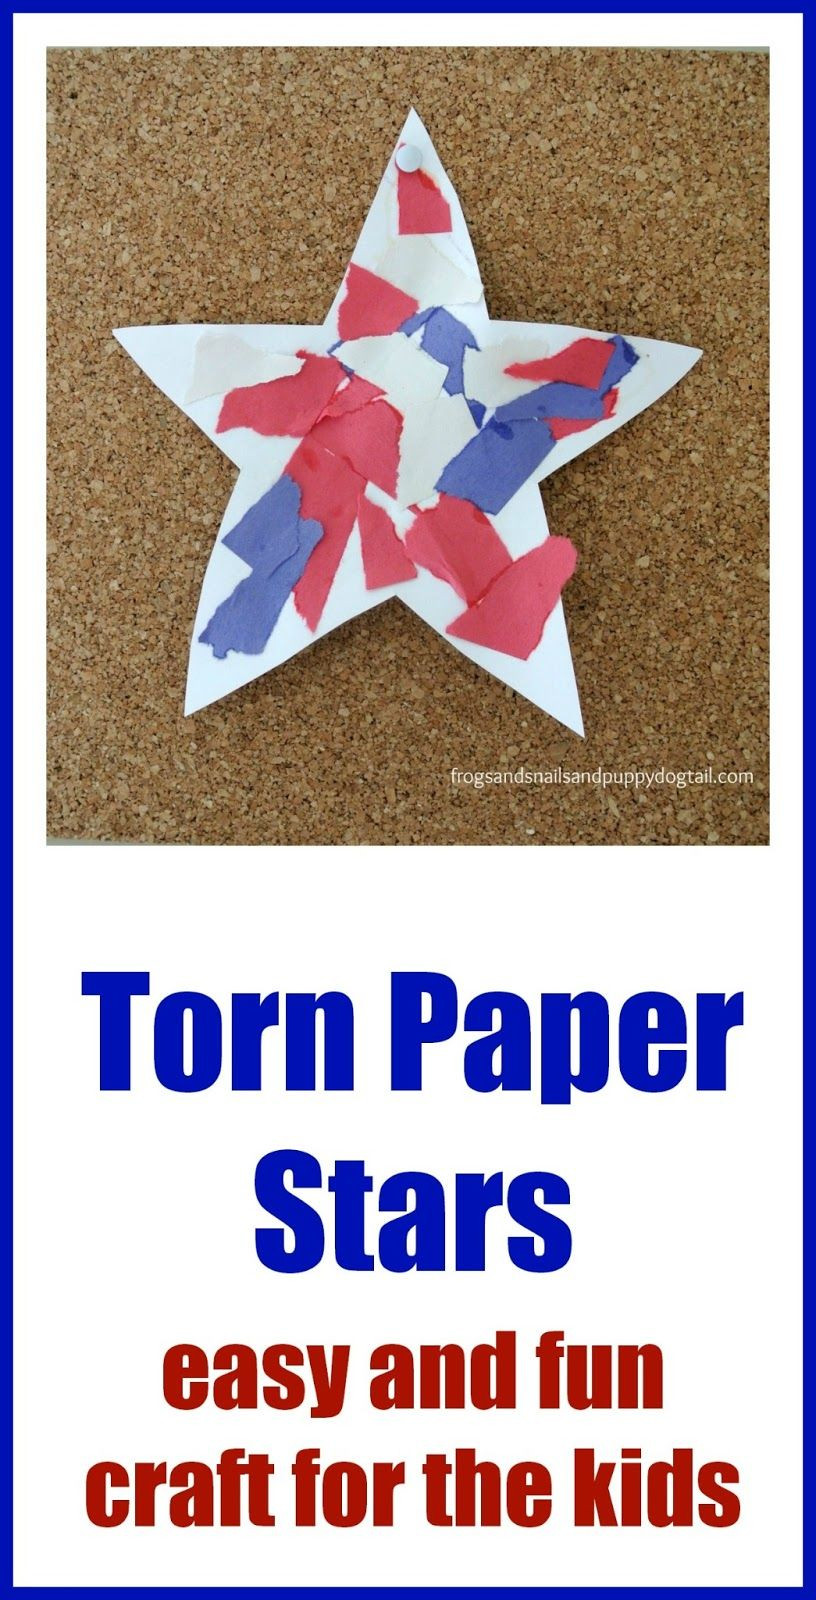 Memorial Day Preschool Crafts
 Patriotic Torn Paper Stars easy and fun craft for the